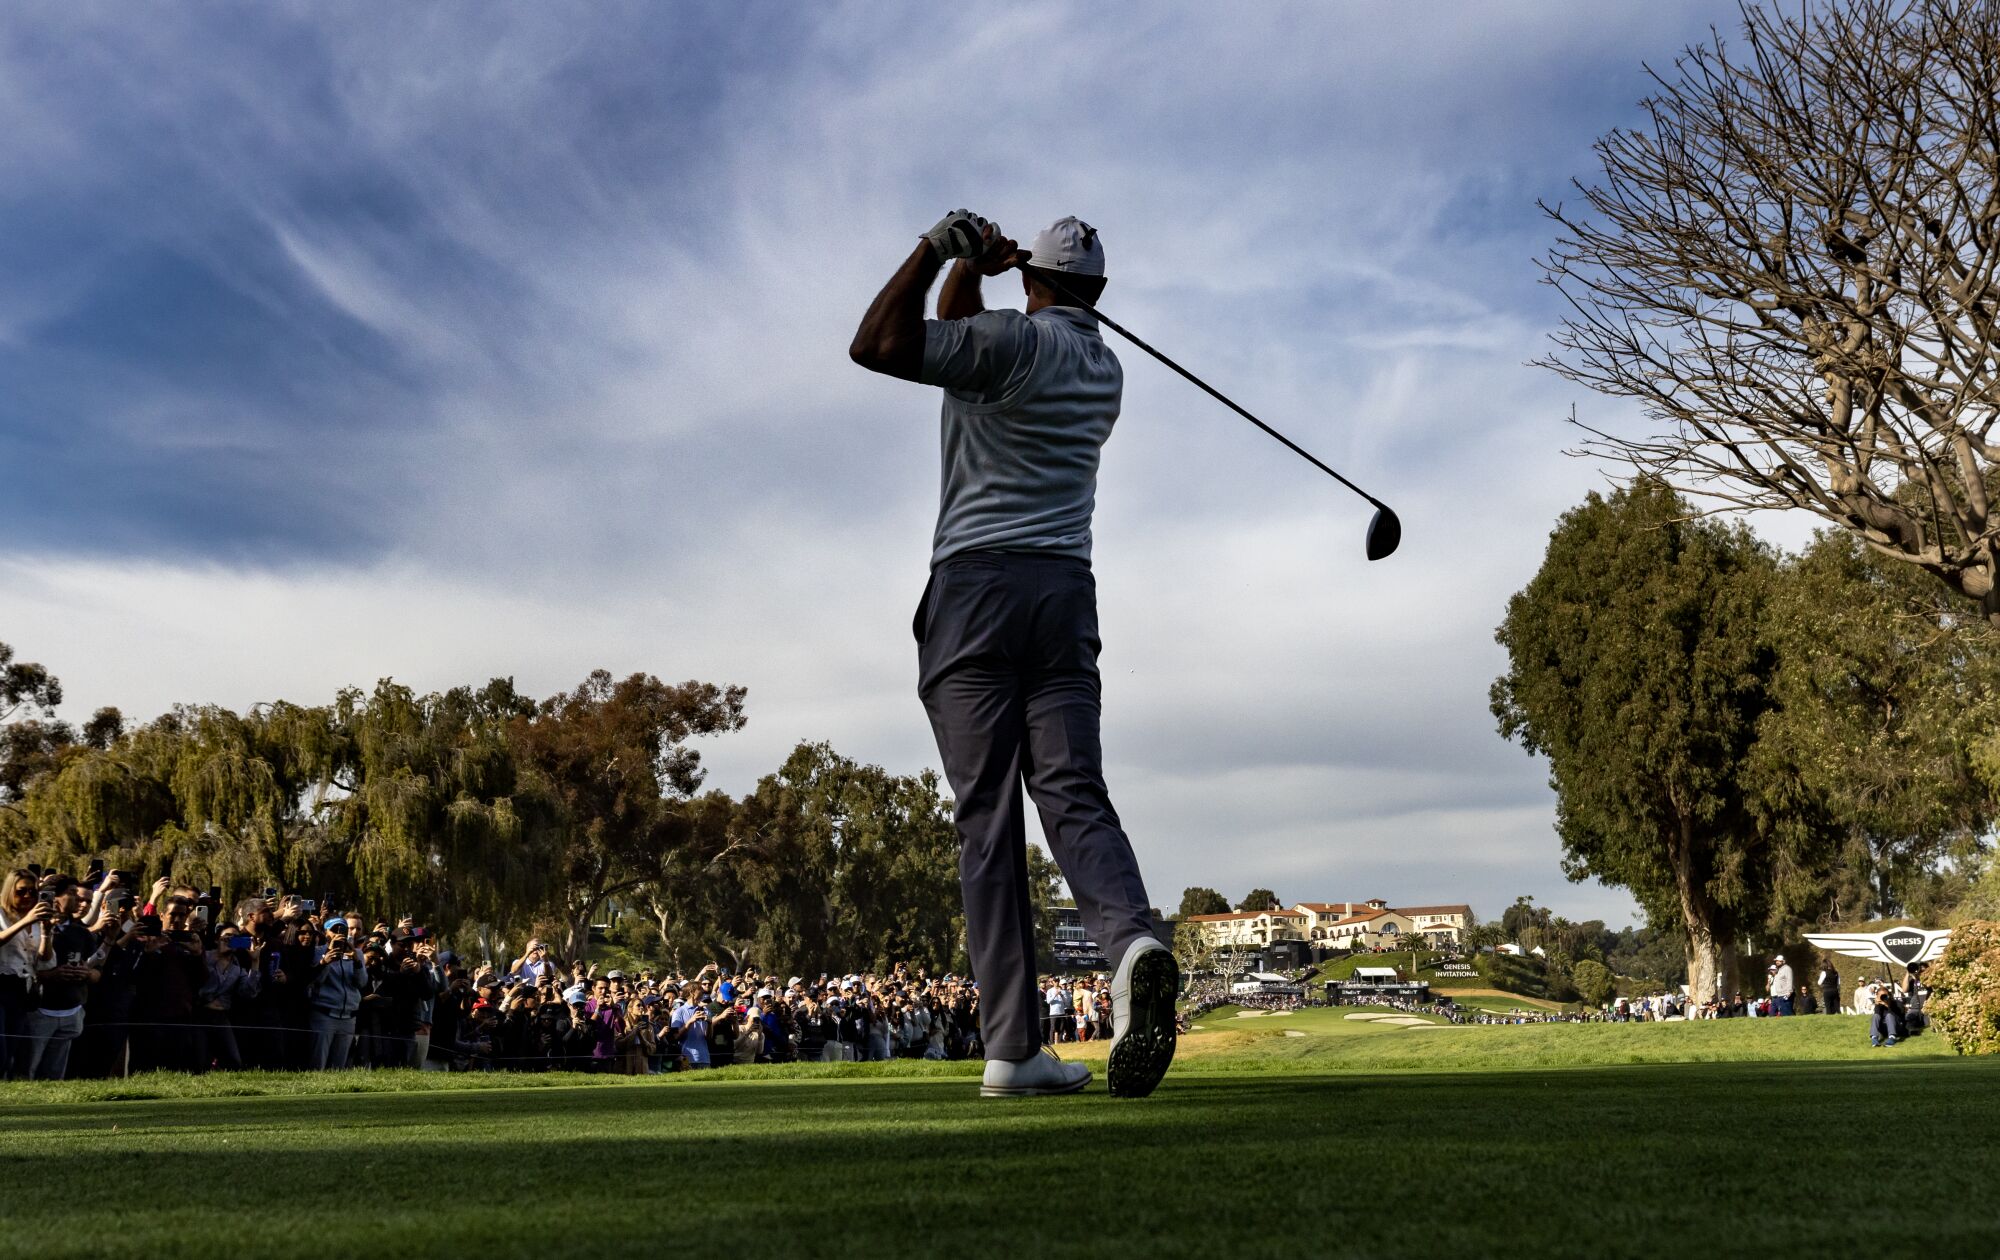  Tiger Woods tees off on the 9th hole.